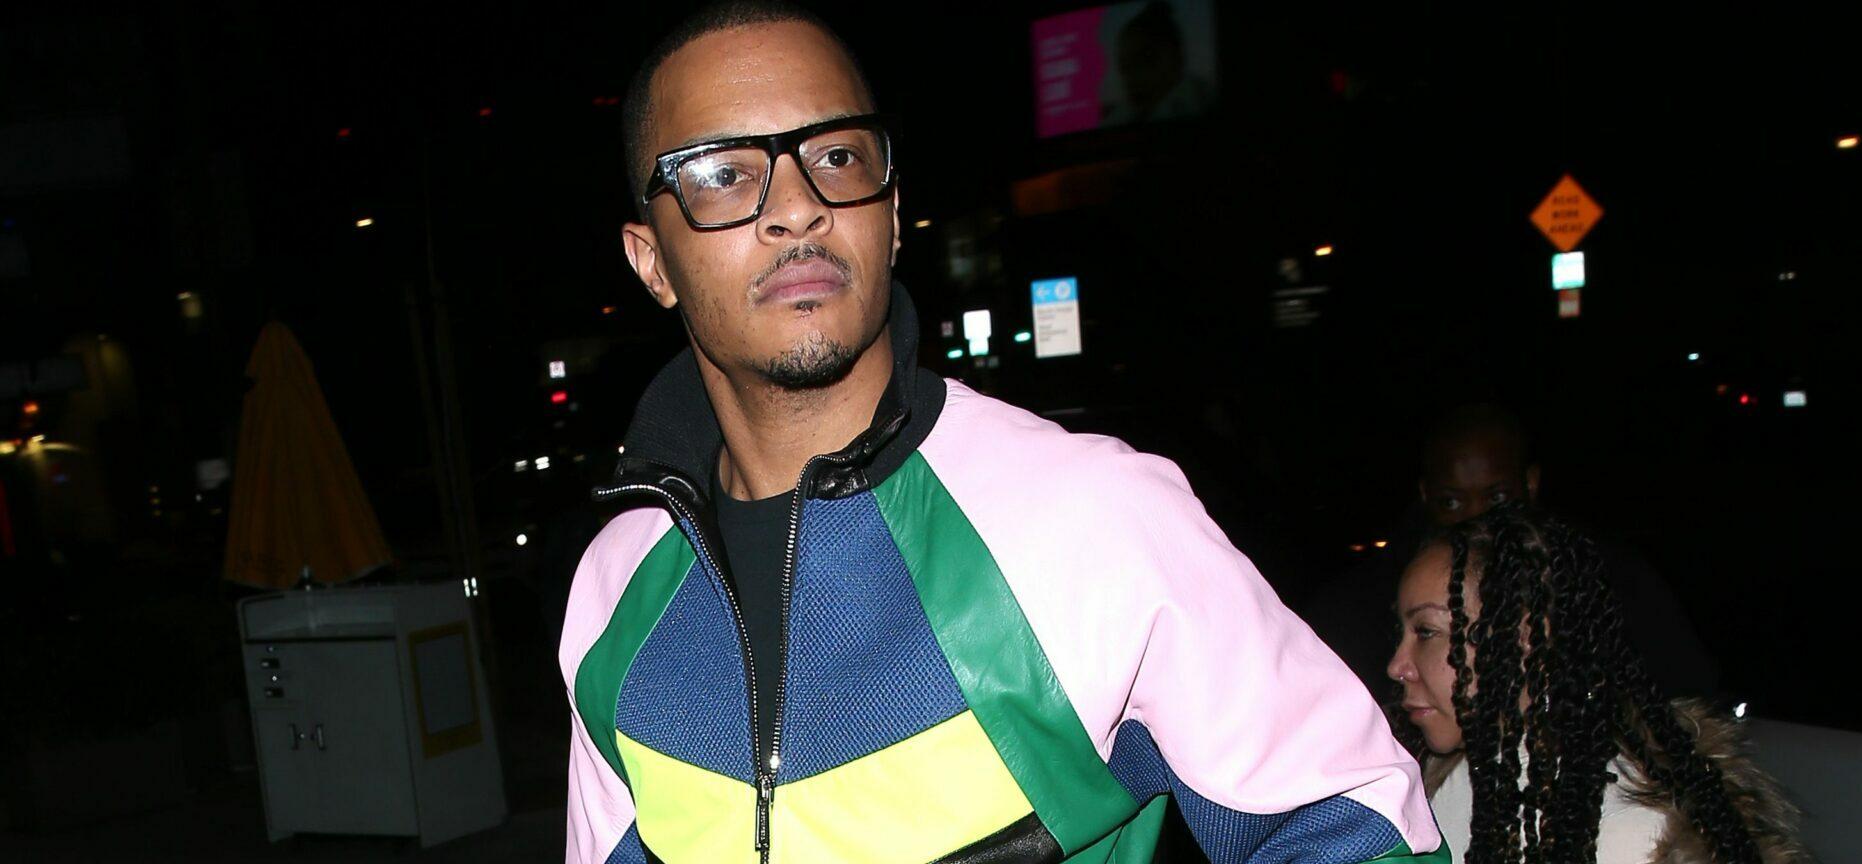 Atlanta’s Mayoral Candidate Reportedly Wants To Shut Down Strip Clubs, Rapper T.I. Responds!